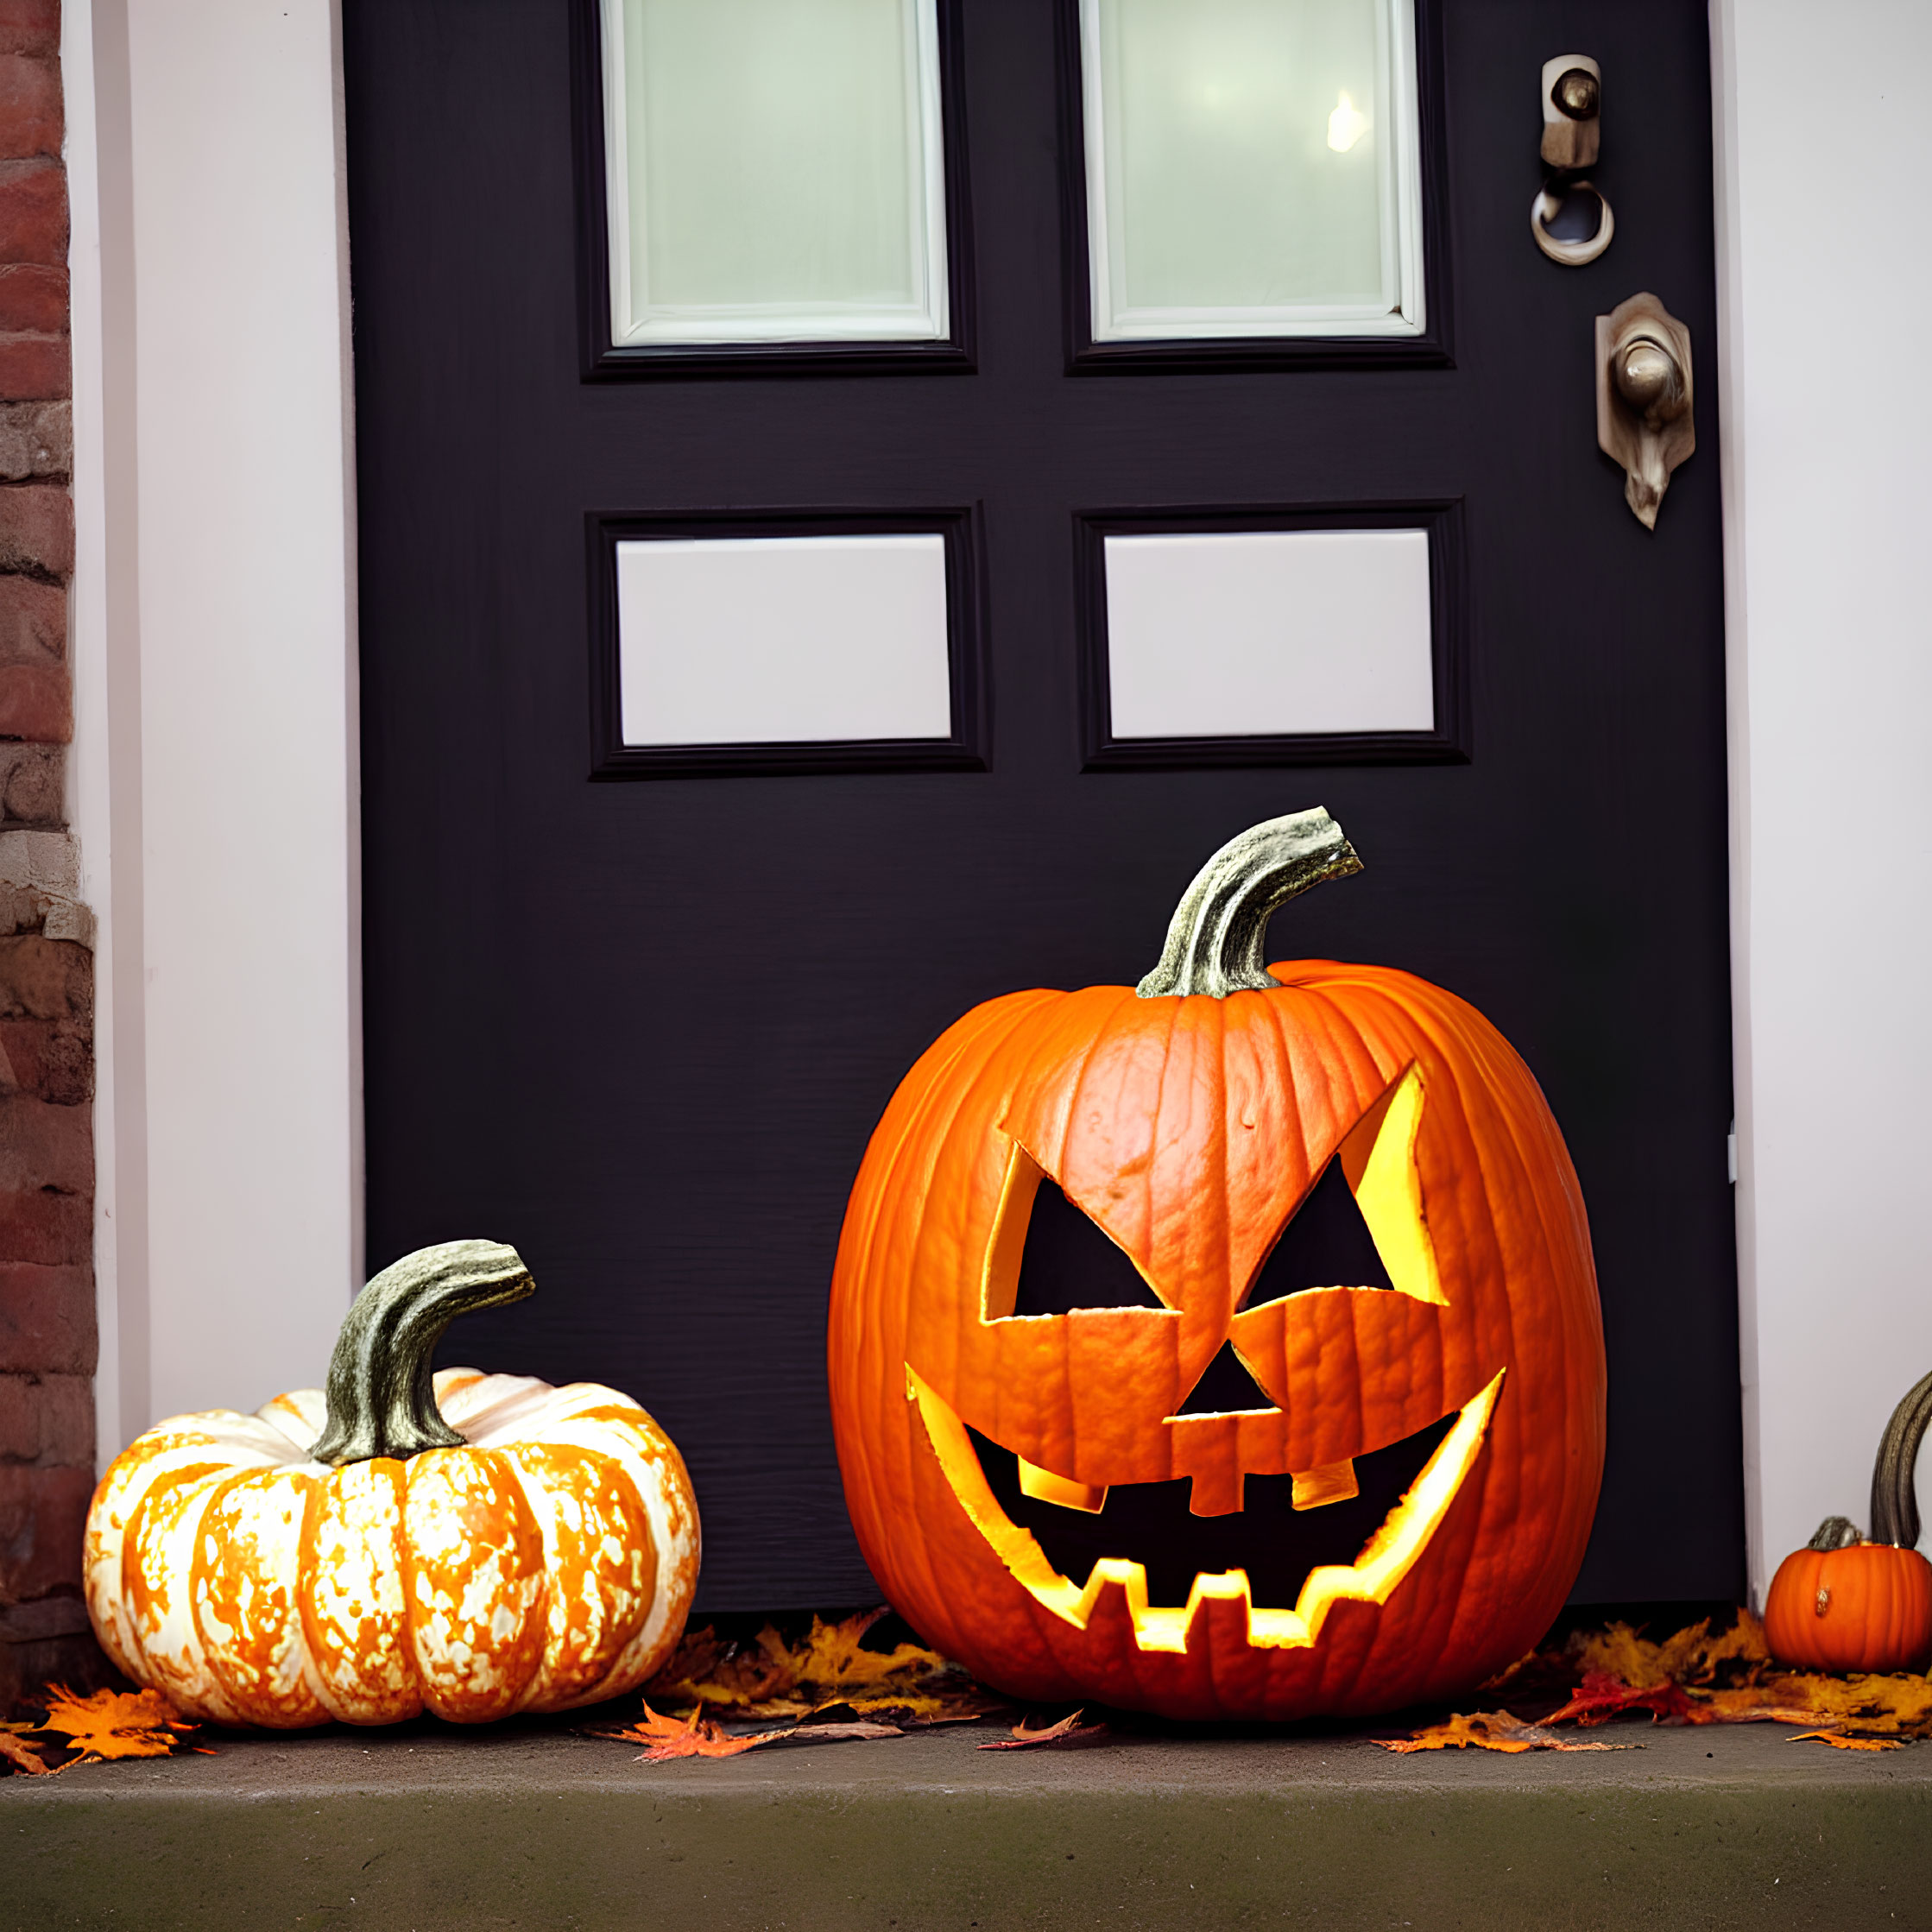 Carved pumpkin with glowing face among autumn leaves and black door